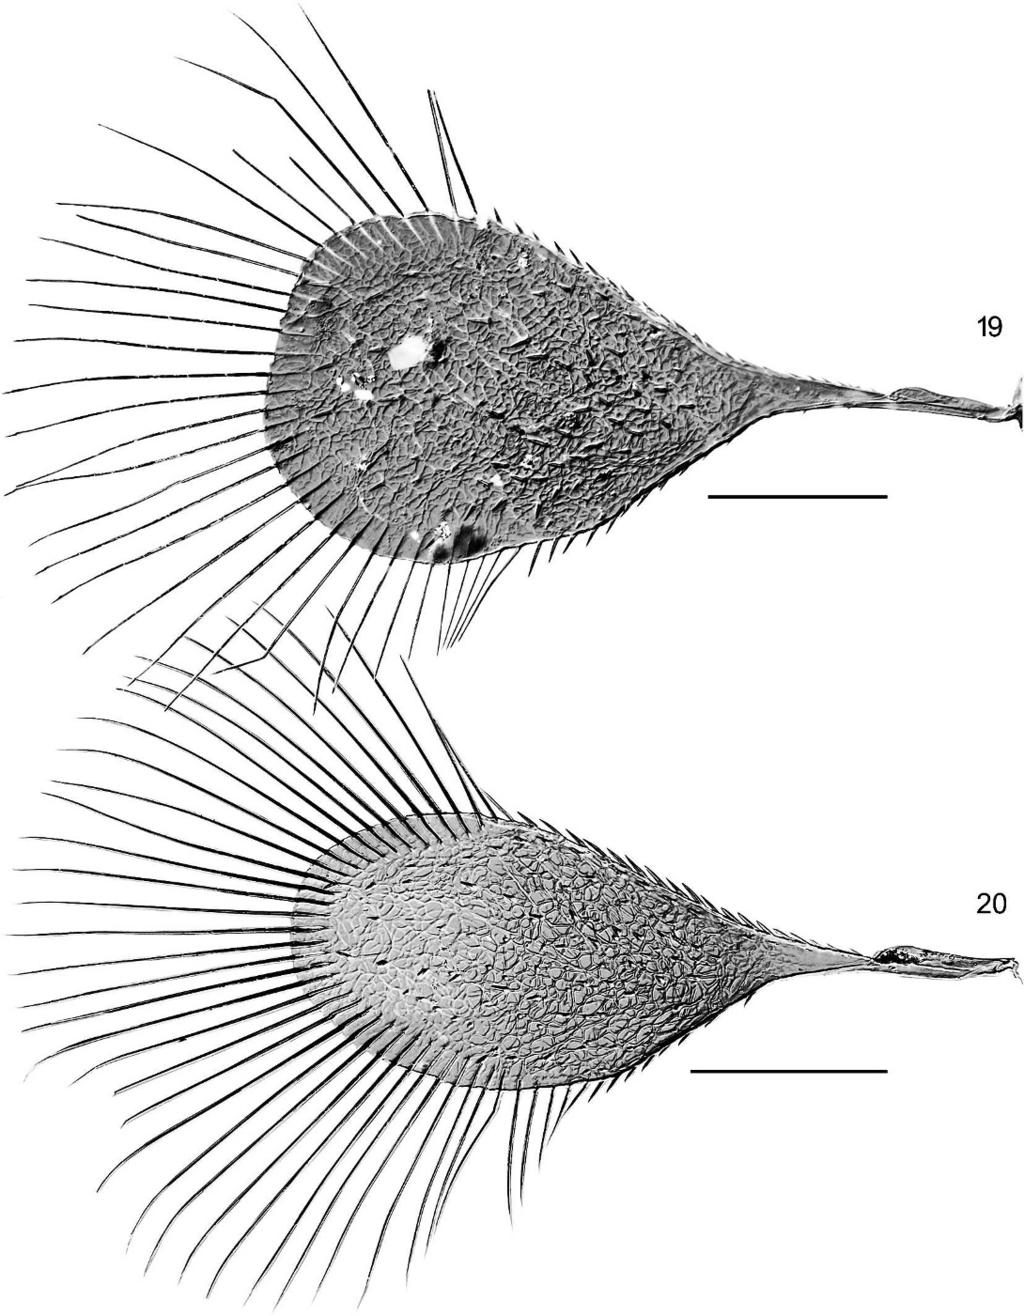 186 JOURNAL OF HYMENOPTERA RESEARCH Figs 19, 20. Mymaromella spp., fore wings. 19, M. cyclopterus, holotype; 20, M. pala, holotype. Scale lines 5 50 mm. (Gibson et al. 2007, figs 13, 35).